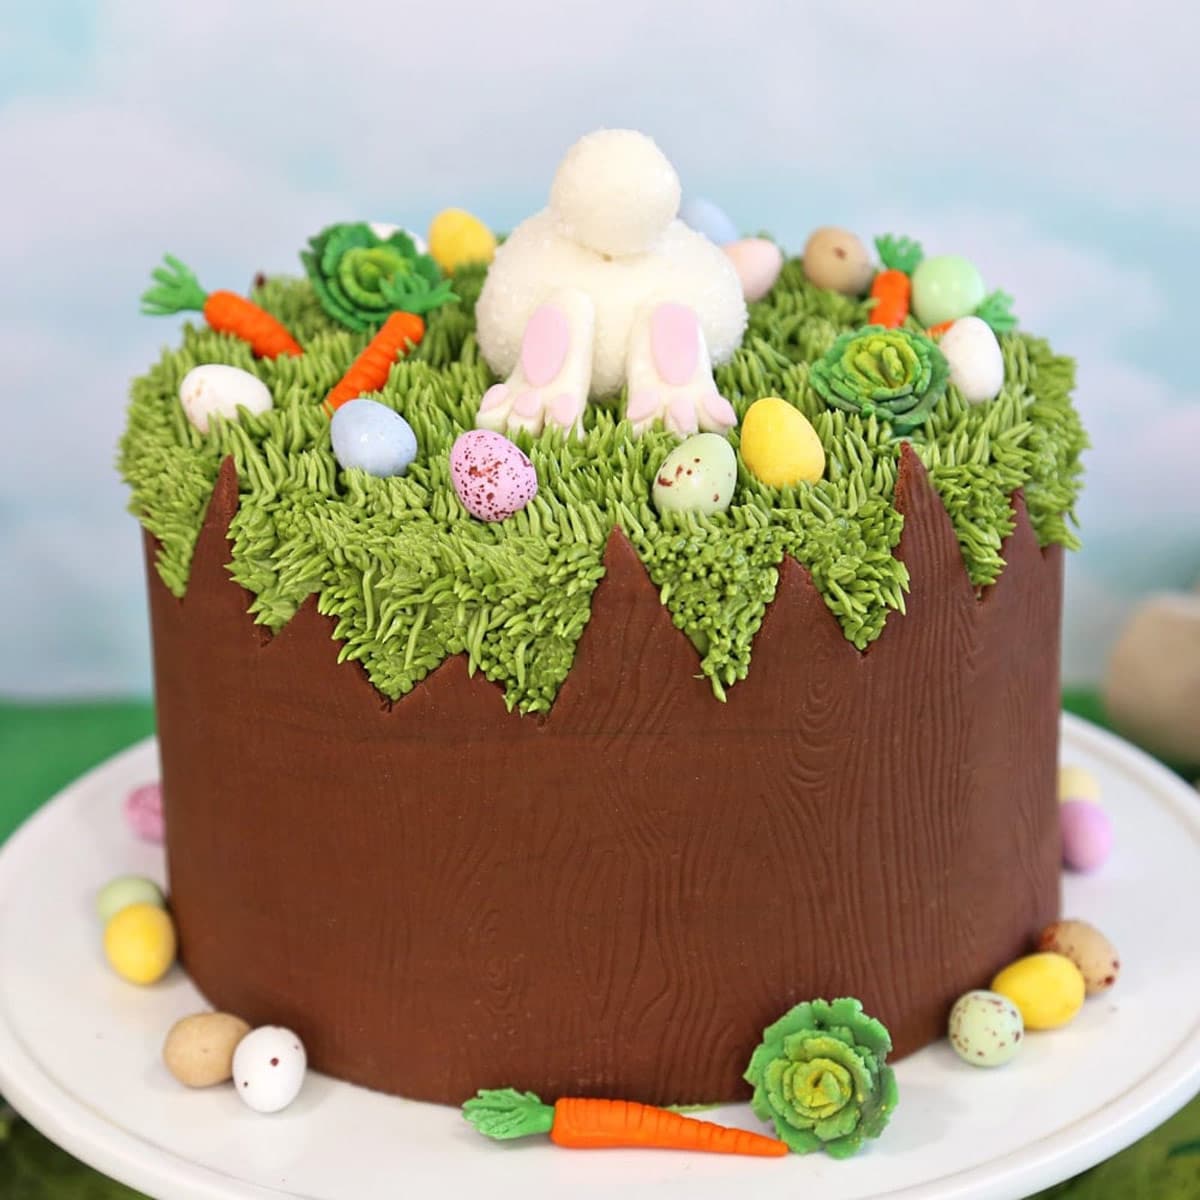 A Chocolate Easter Bunny Cake on a small white cake plate.